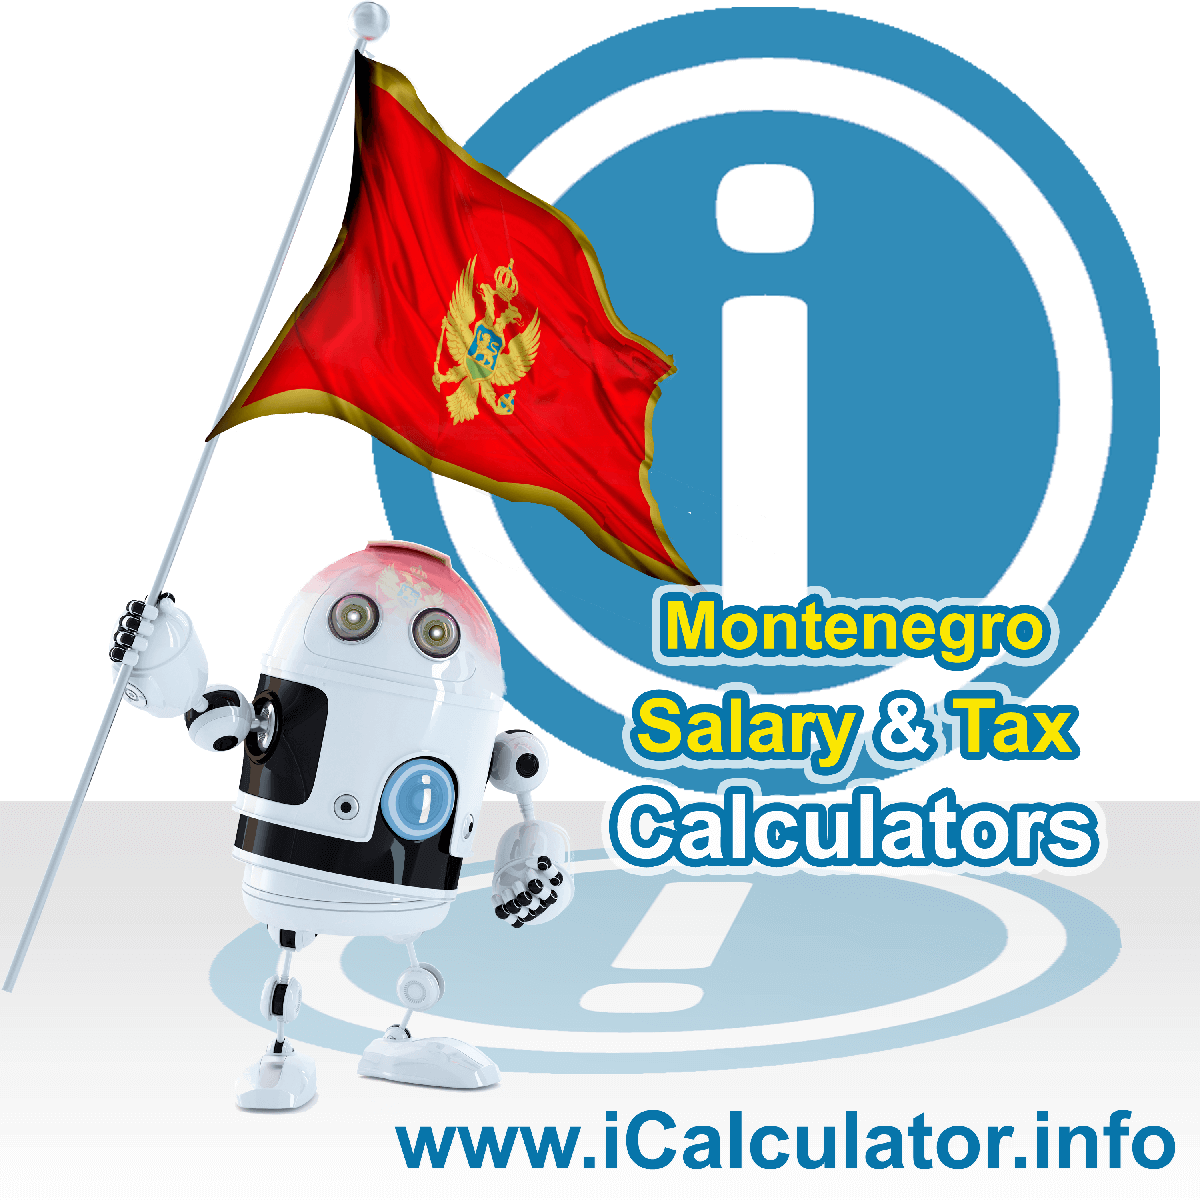 Montenegro Tax Calculator. This image shows the Montenegro flag and information relating to the tax formula for the Montenegro Salary Calculator